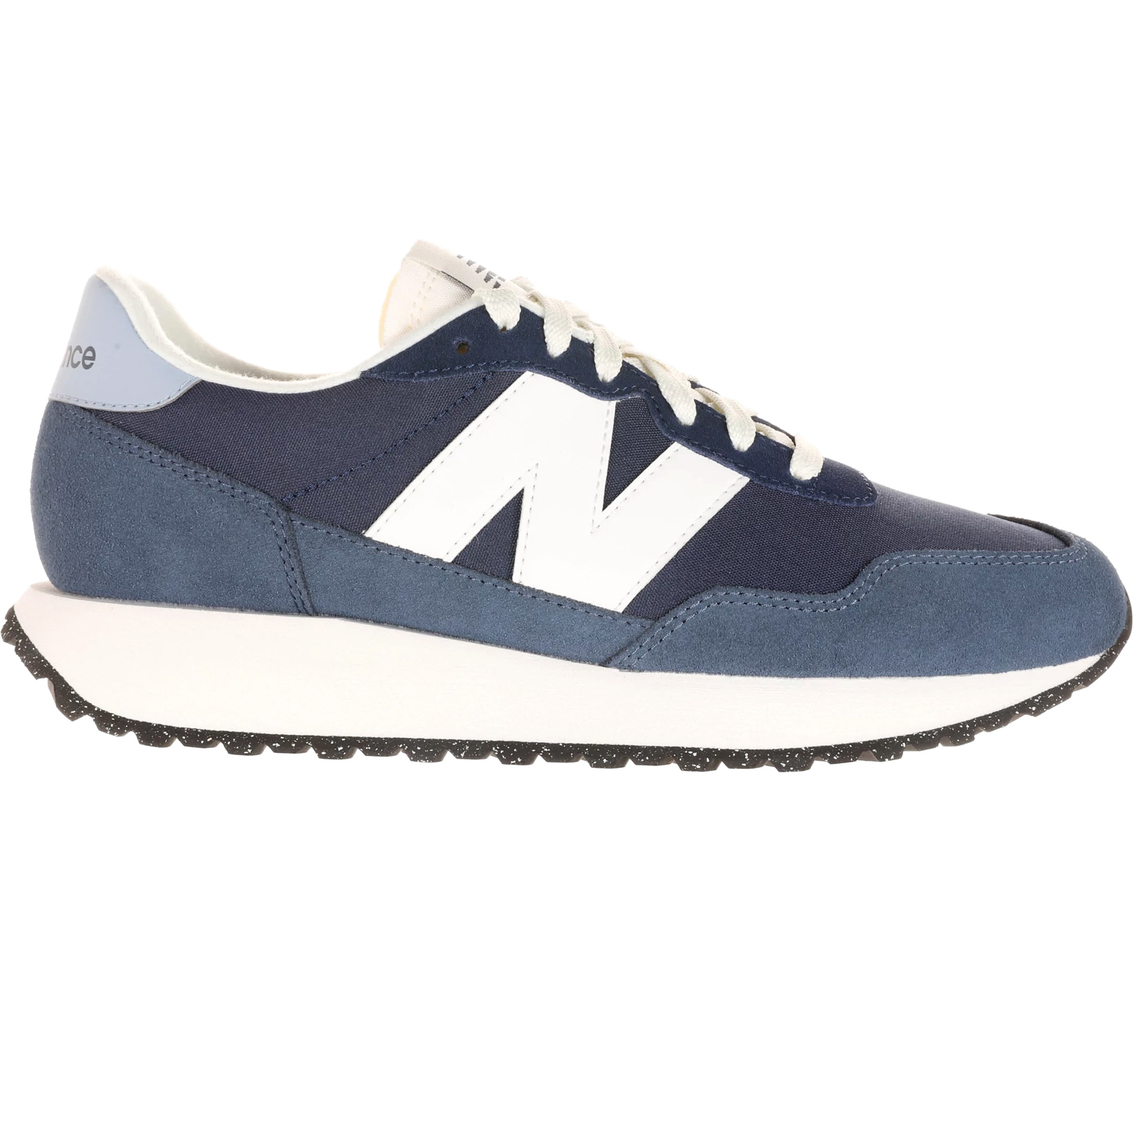 New Balance Women's 237 Sneakers - Image 2 of 3